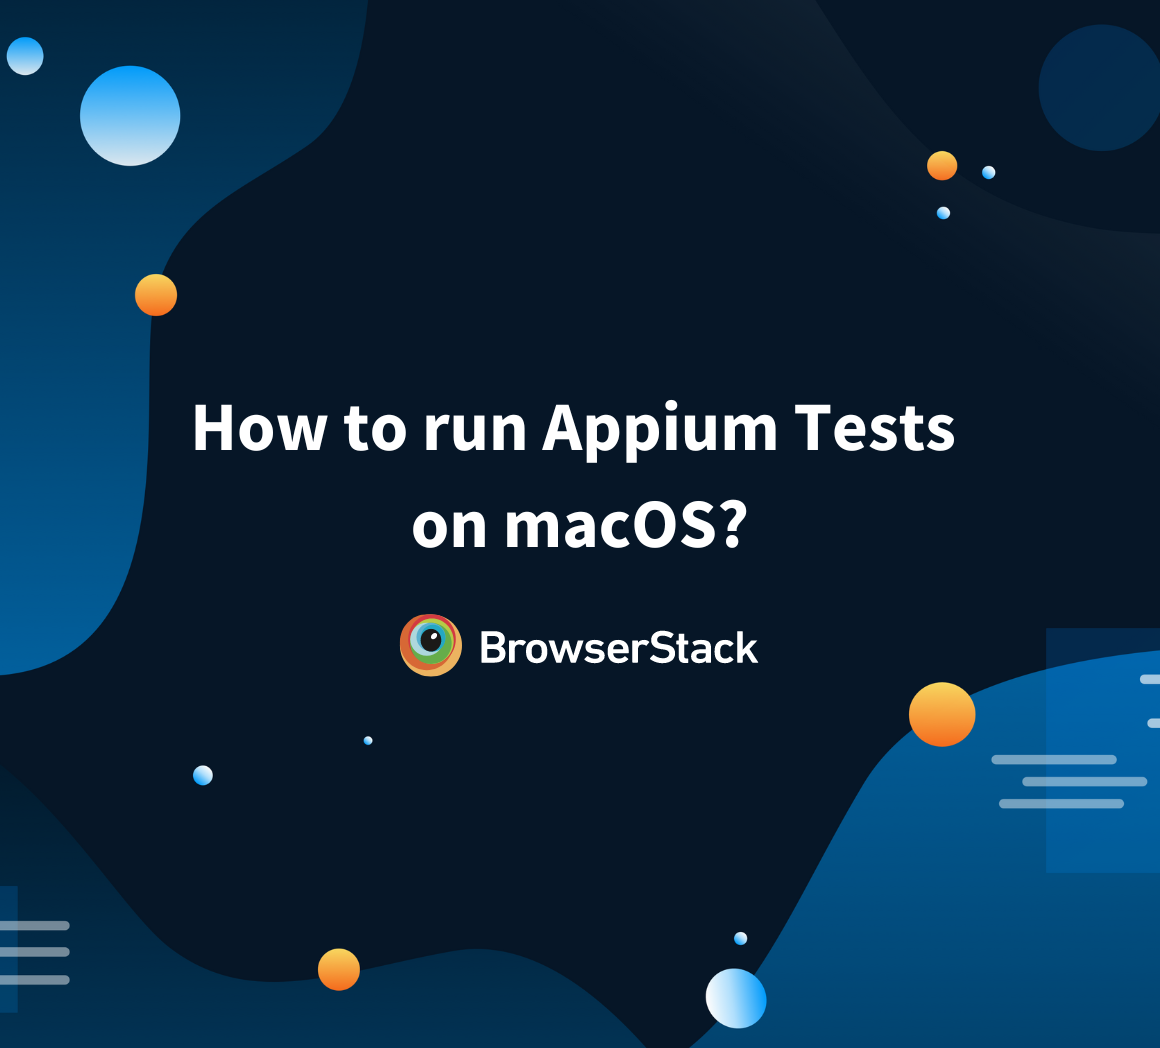 How many Mac Apps are You Sporting? / What is your #AppNum